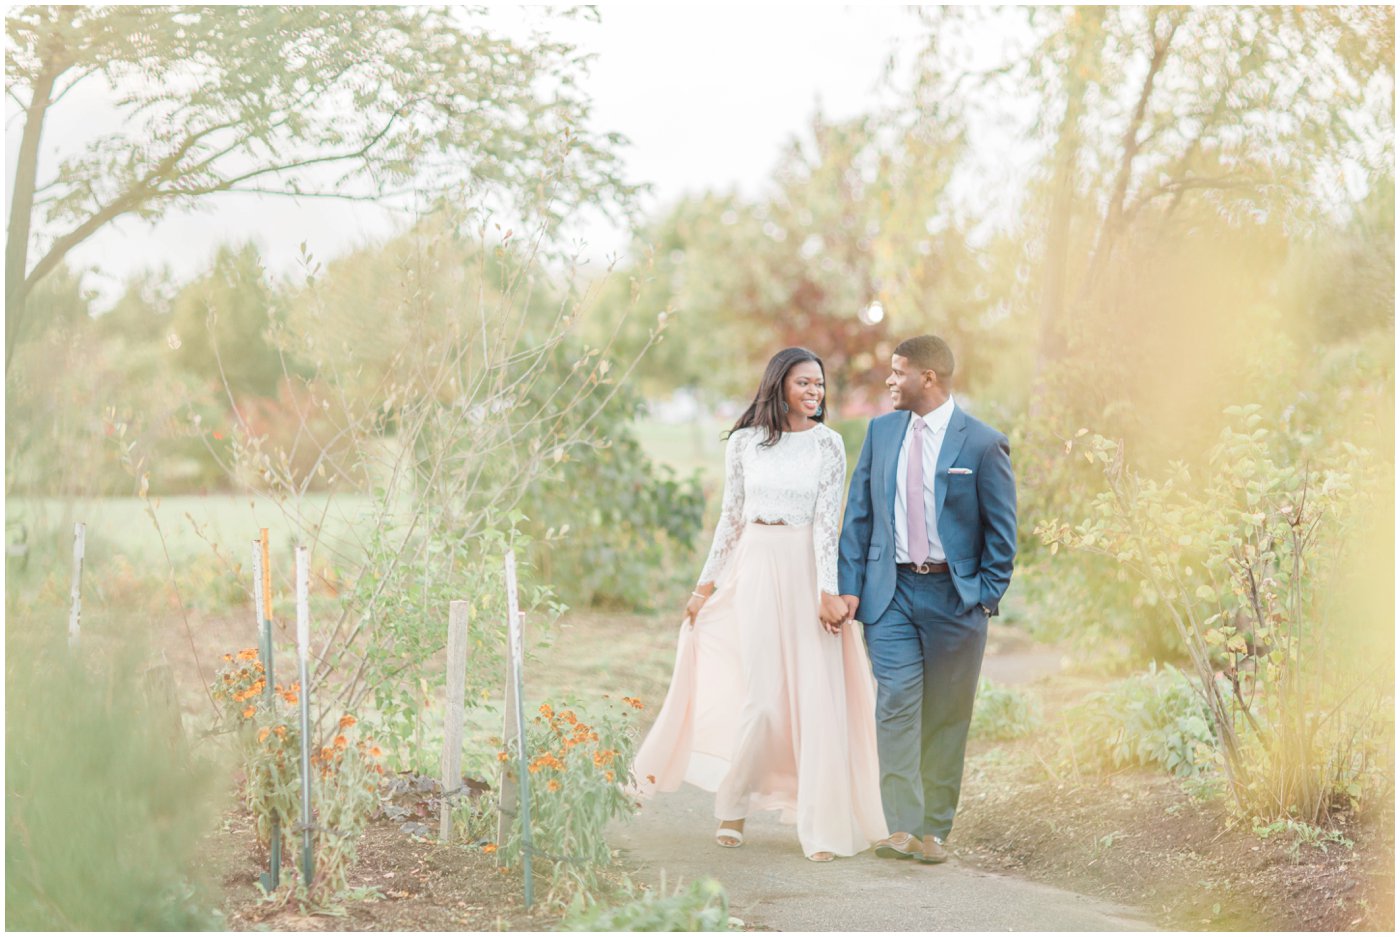 What to Wear for your Engagement Session, orlando wedding photographer, destination wedding photographer, new york wedding photographer, New Jersey Wedding Photographer